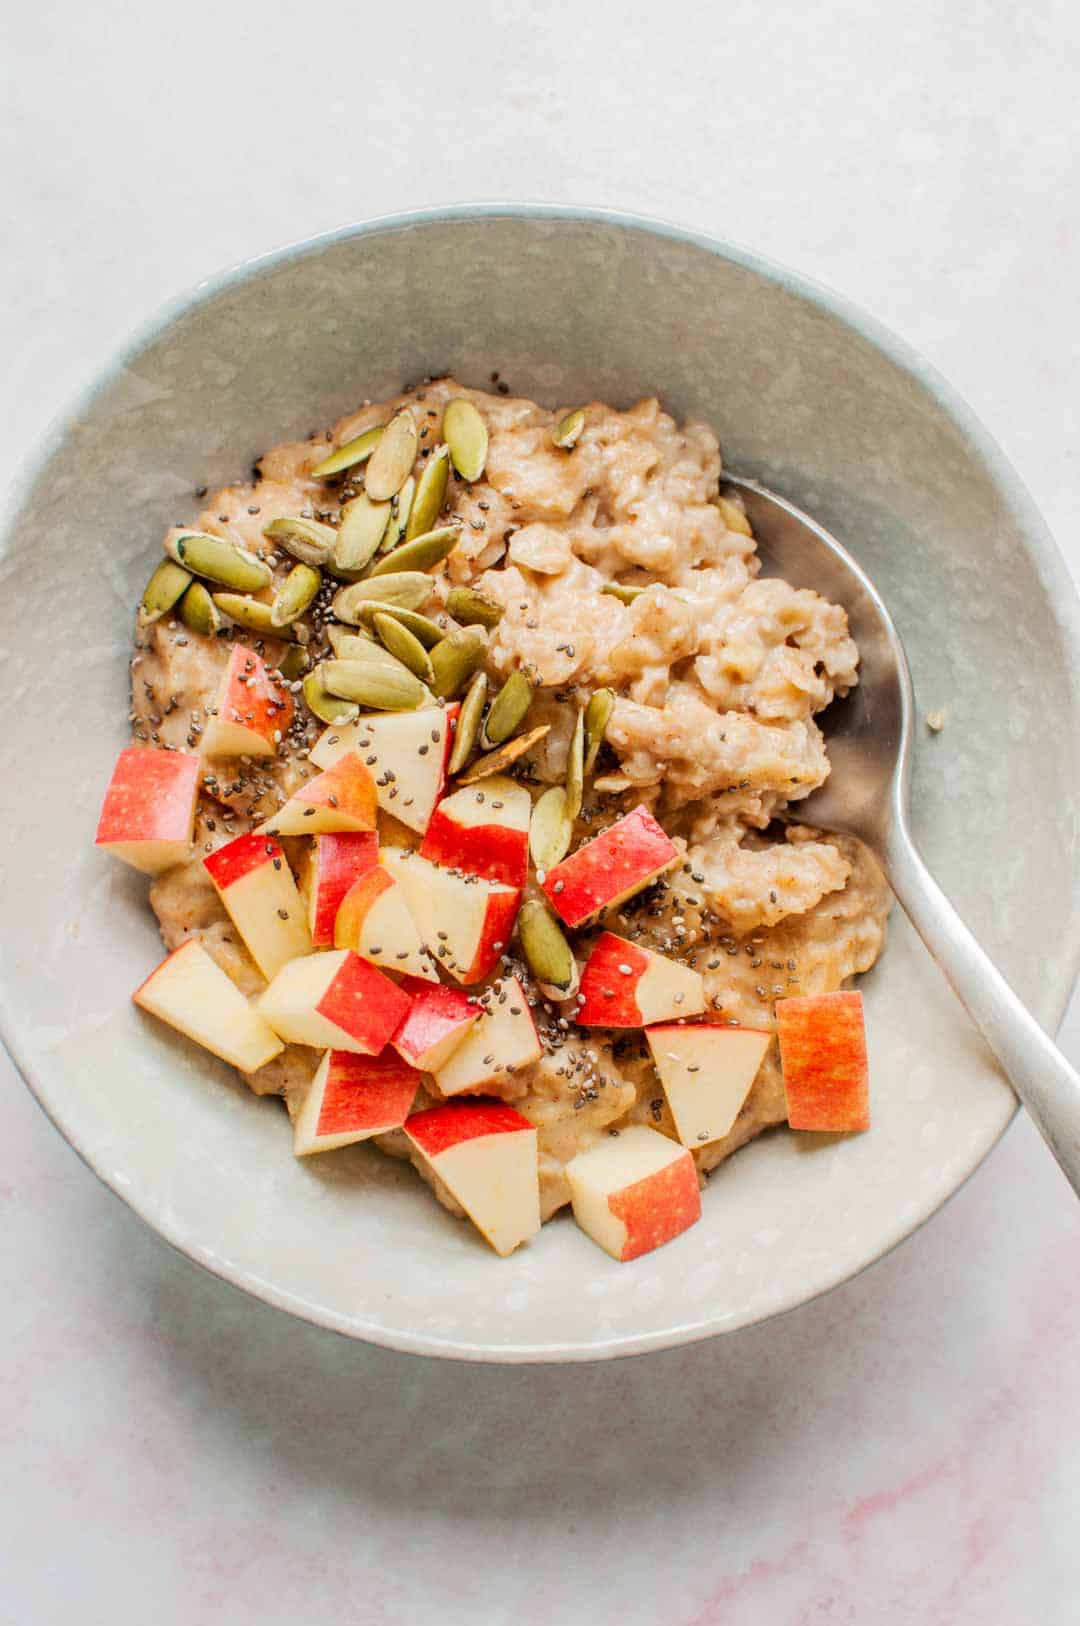 Pumpkin spice oatmeal topped with chopped apples in a grey bowl.